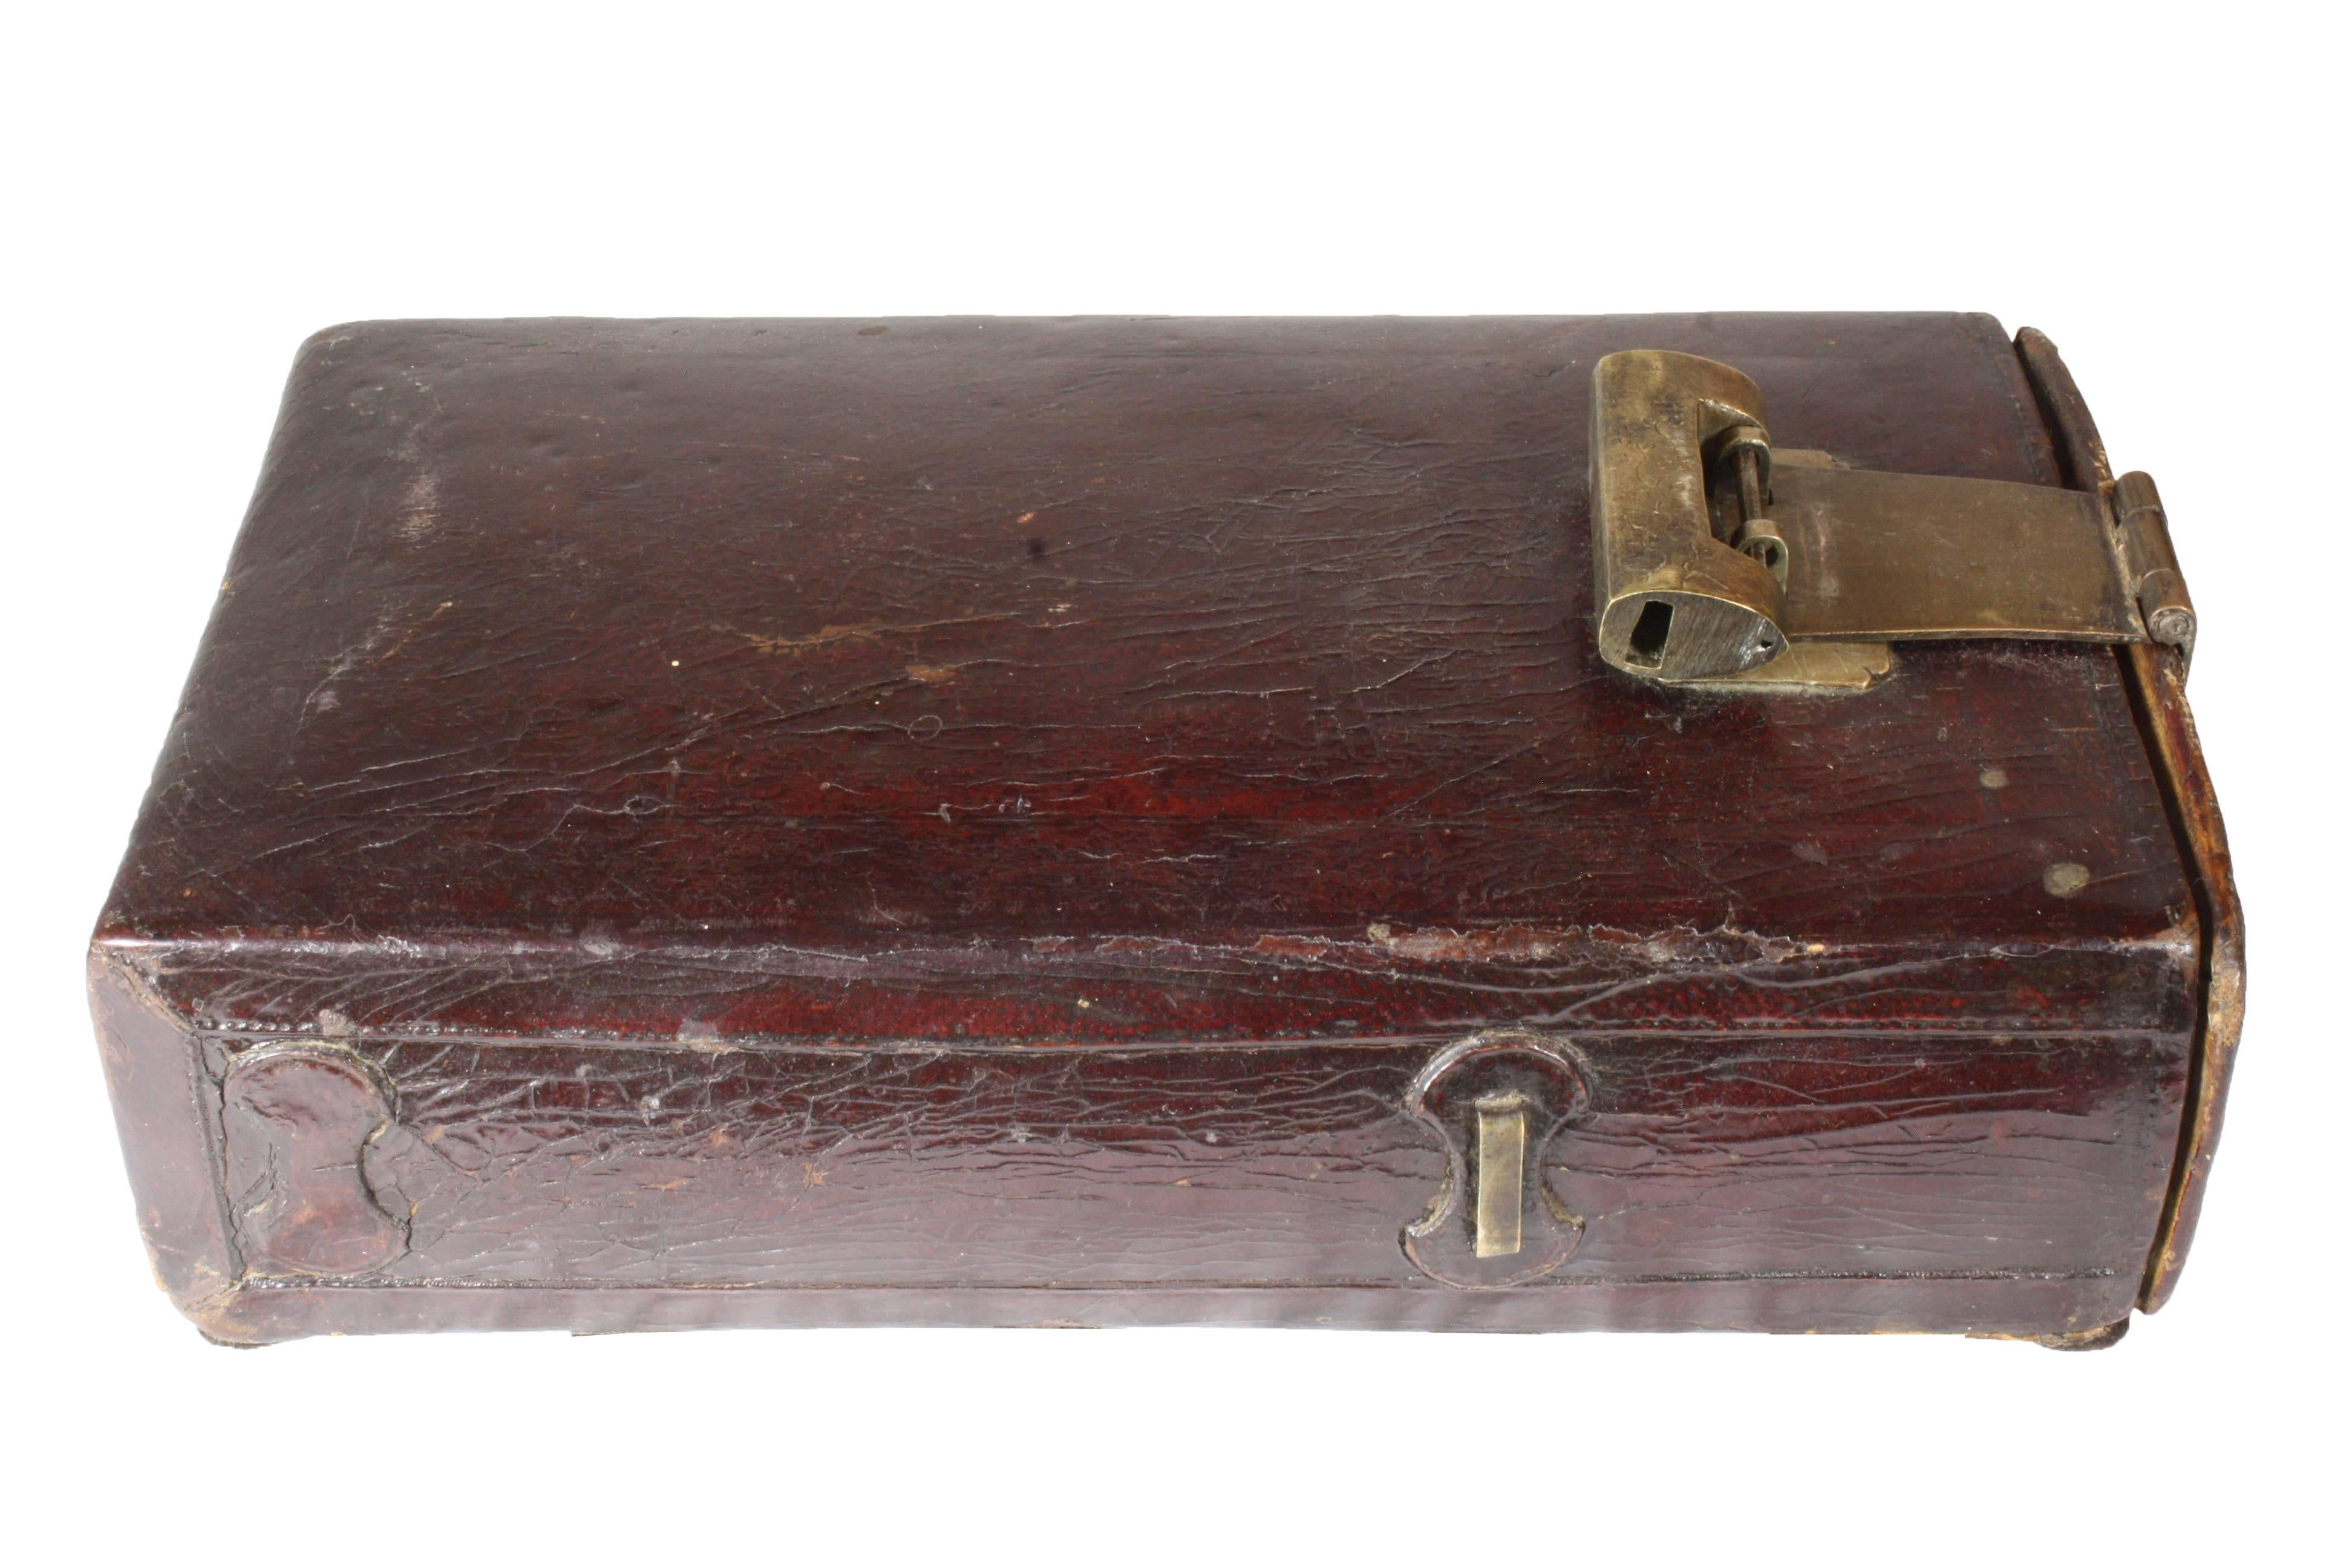 A brown mahogany leather case of a type that was used throughout Asian countries for storing opium and opium smoking accessories. With the original brass lock and key featuring a typical engraving of a blossoming cherry tree. A similar item can be